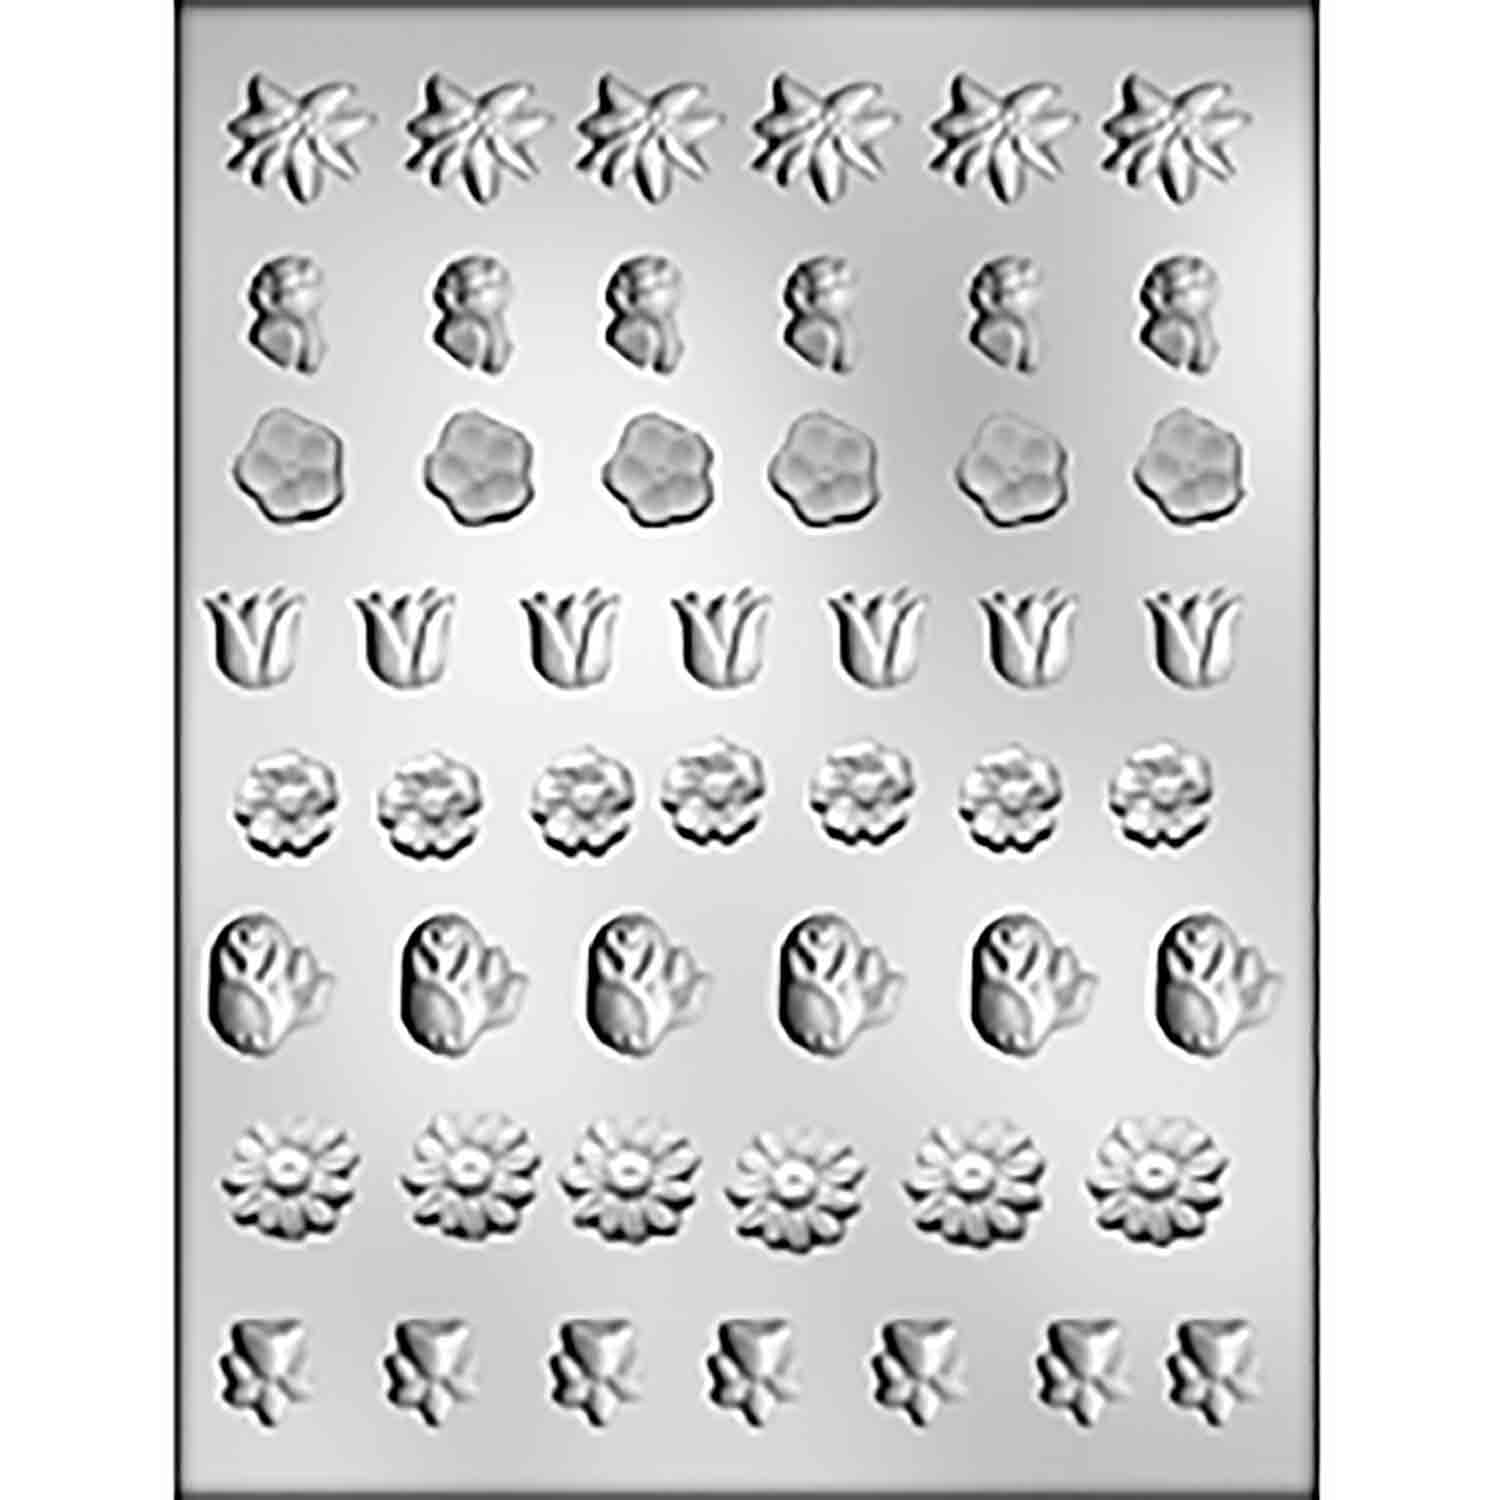 Flower Lay-Ons Chocolate Mold